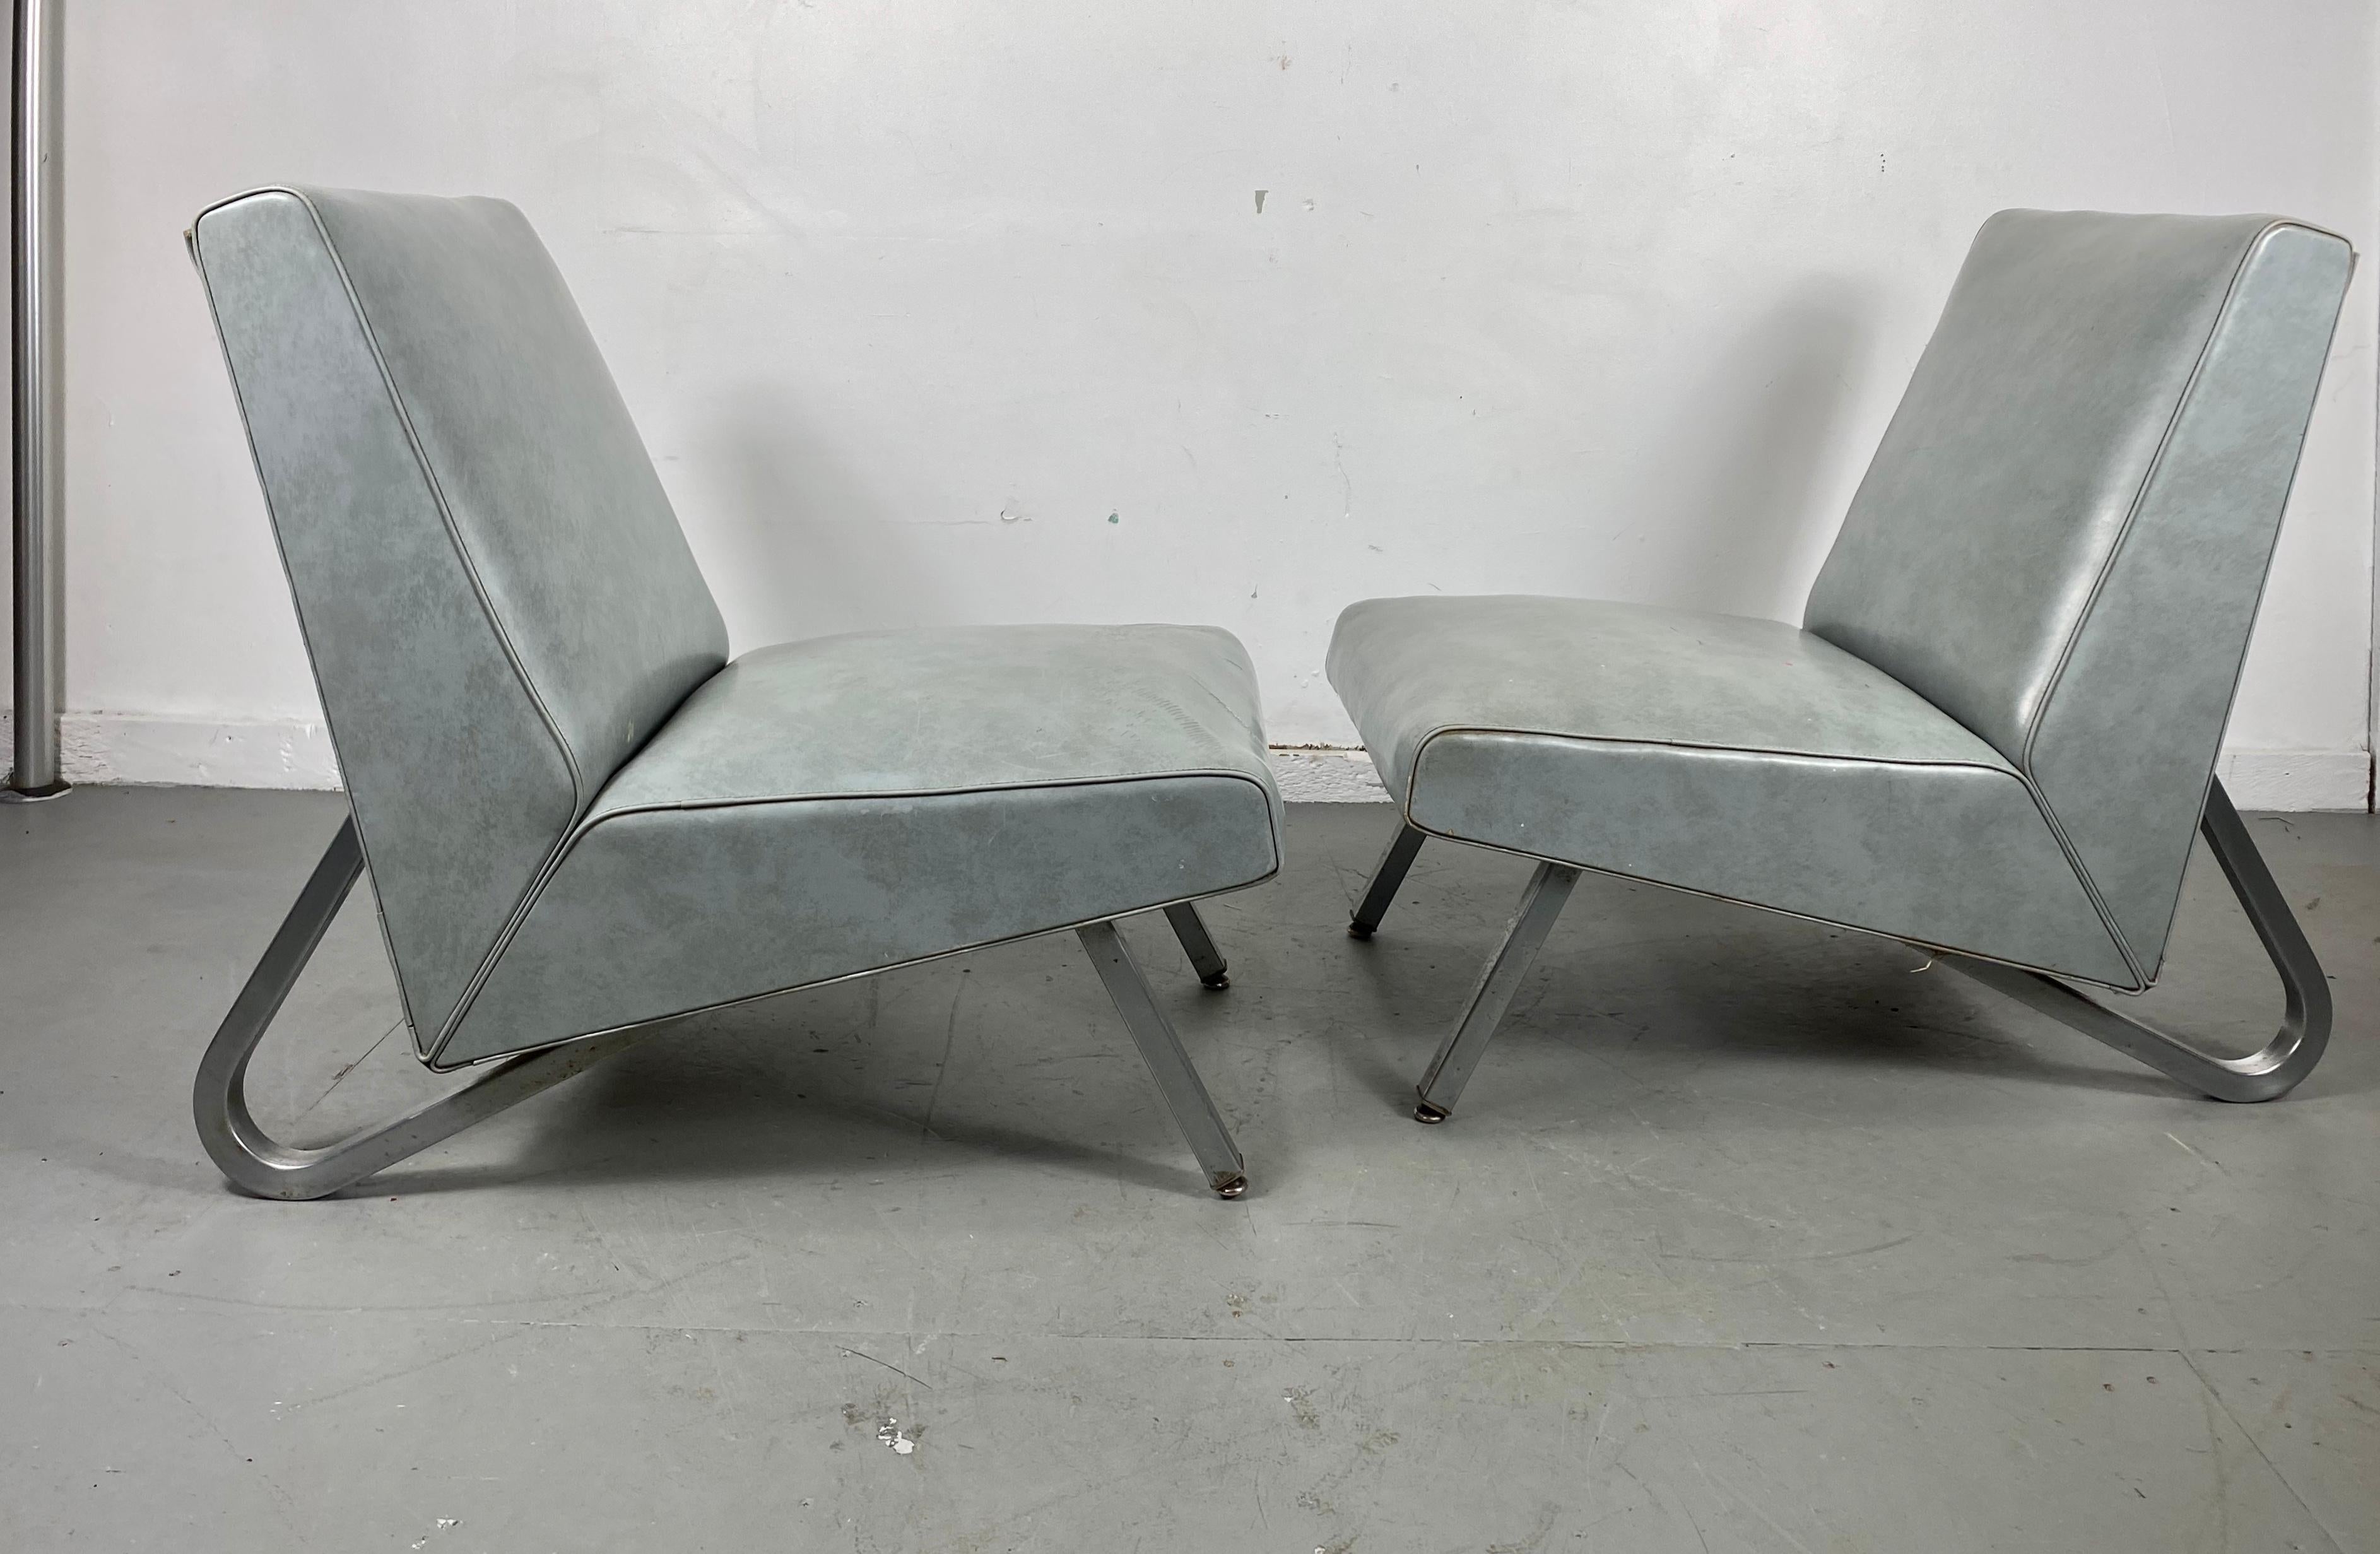 American Stunning Pair of Modernist Deco Slipper Lounge Chairs Royal Metal Mfg. Co. 1940s